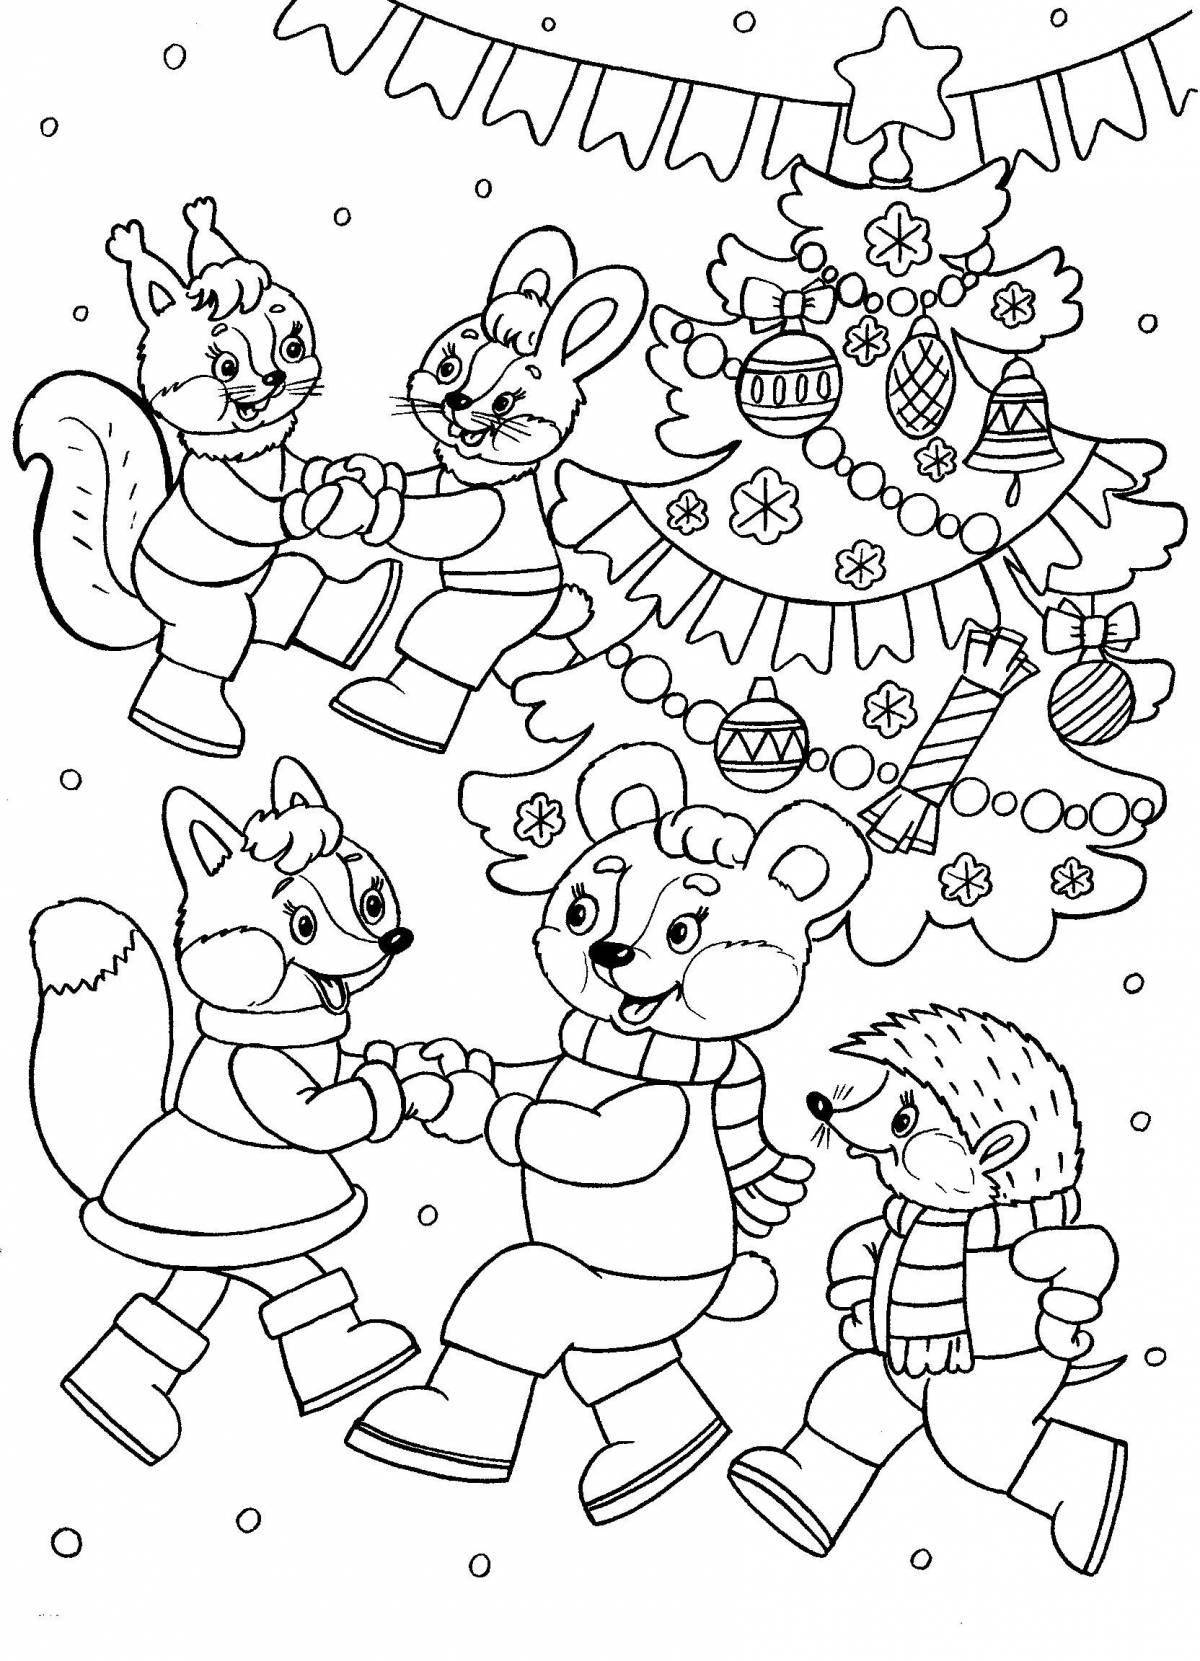 Merry Christmas coloring book for 8-9 year olds